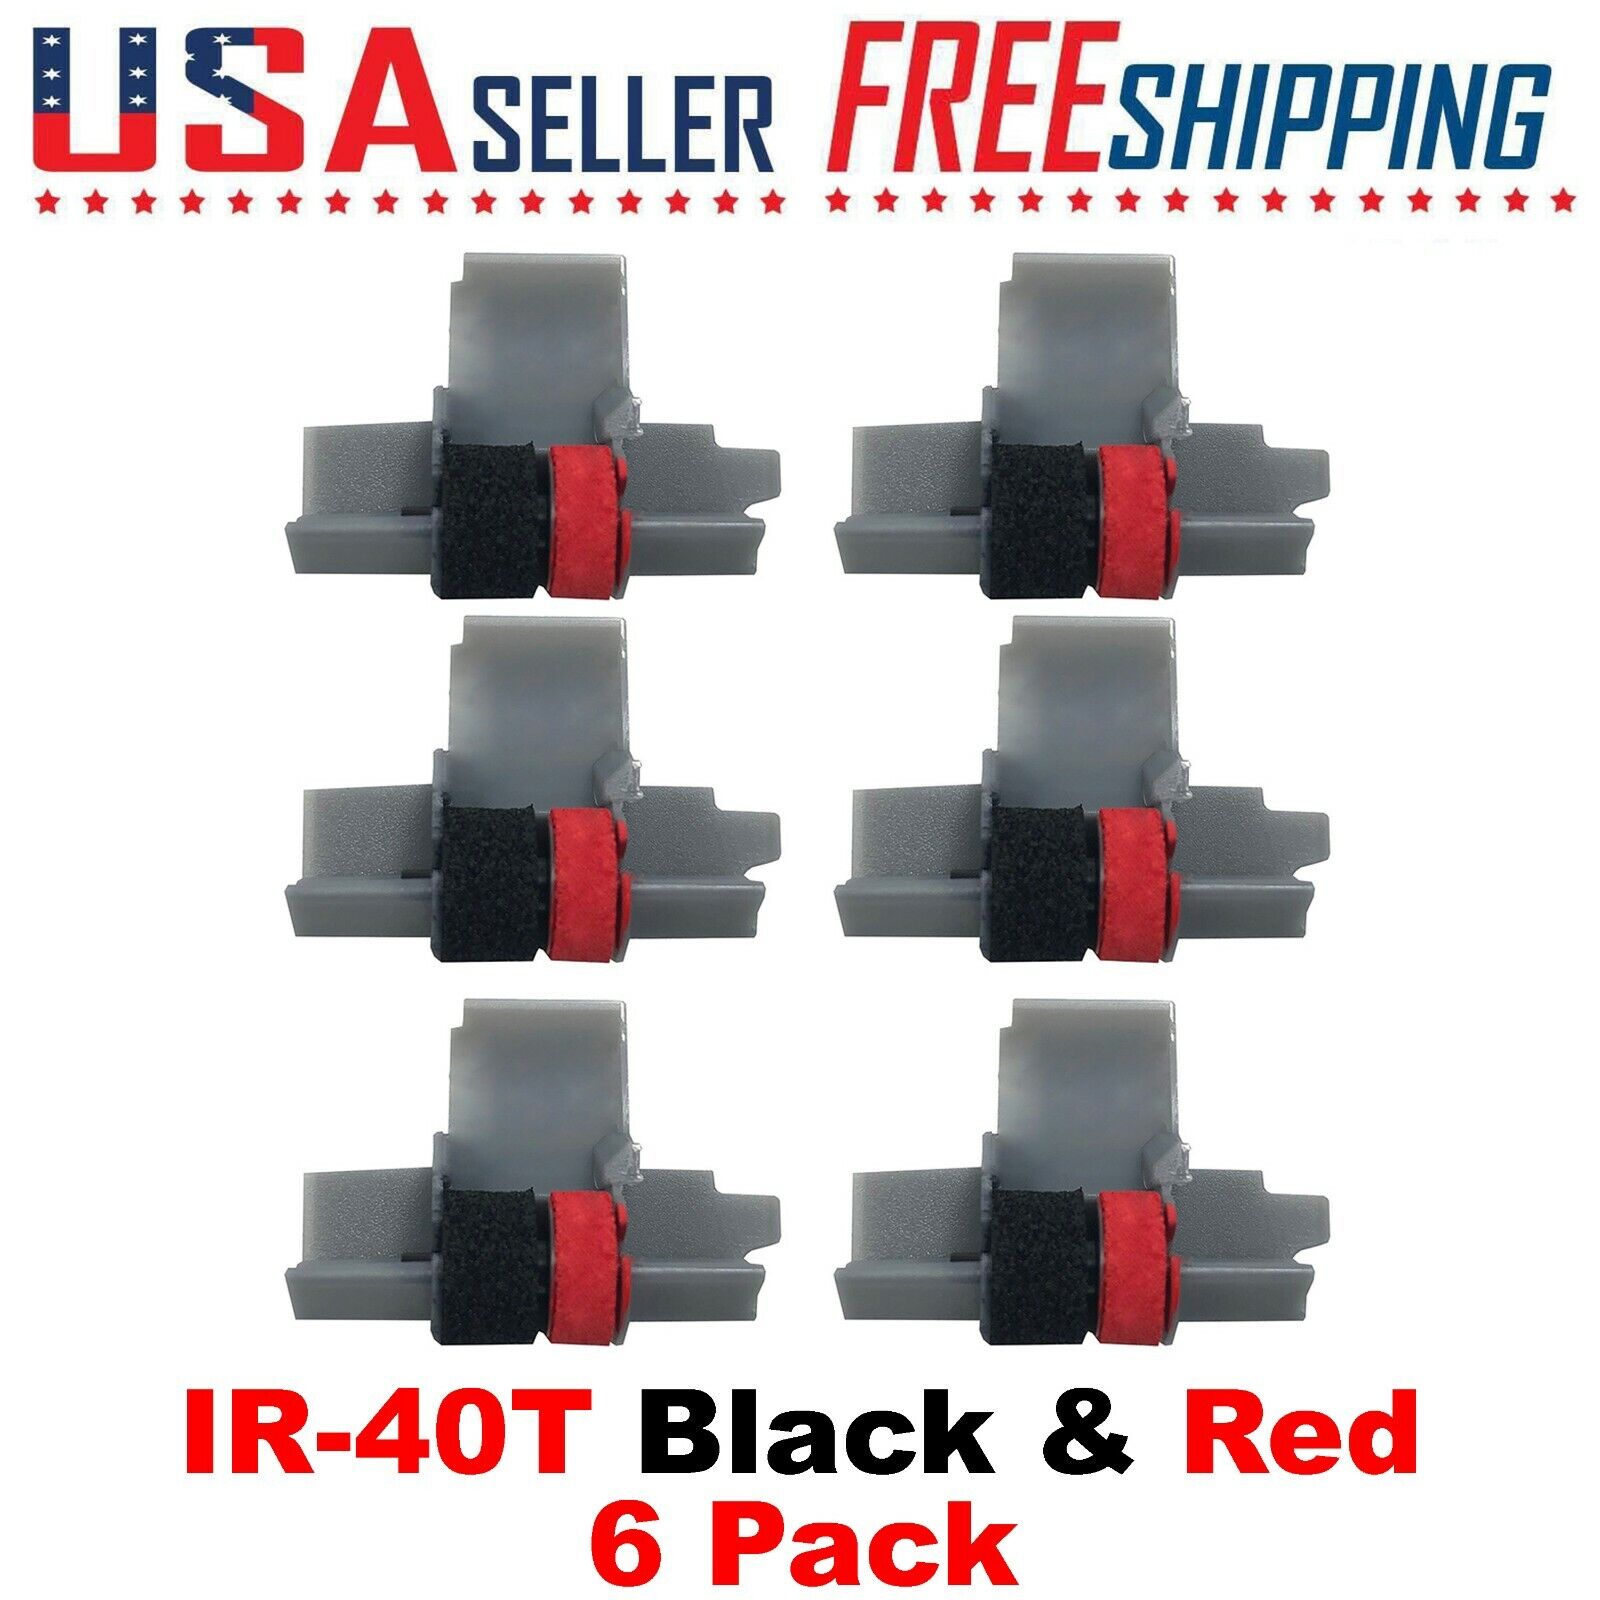 IR-40T Black and Red x 6 Pack Calculator Ink Rollers CP13 NR42 IR40T Sharp Casio